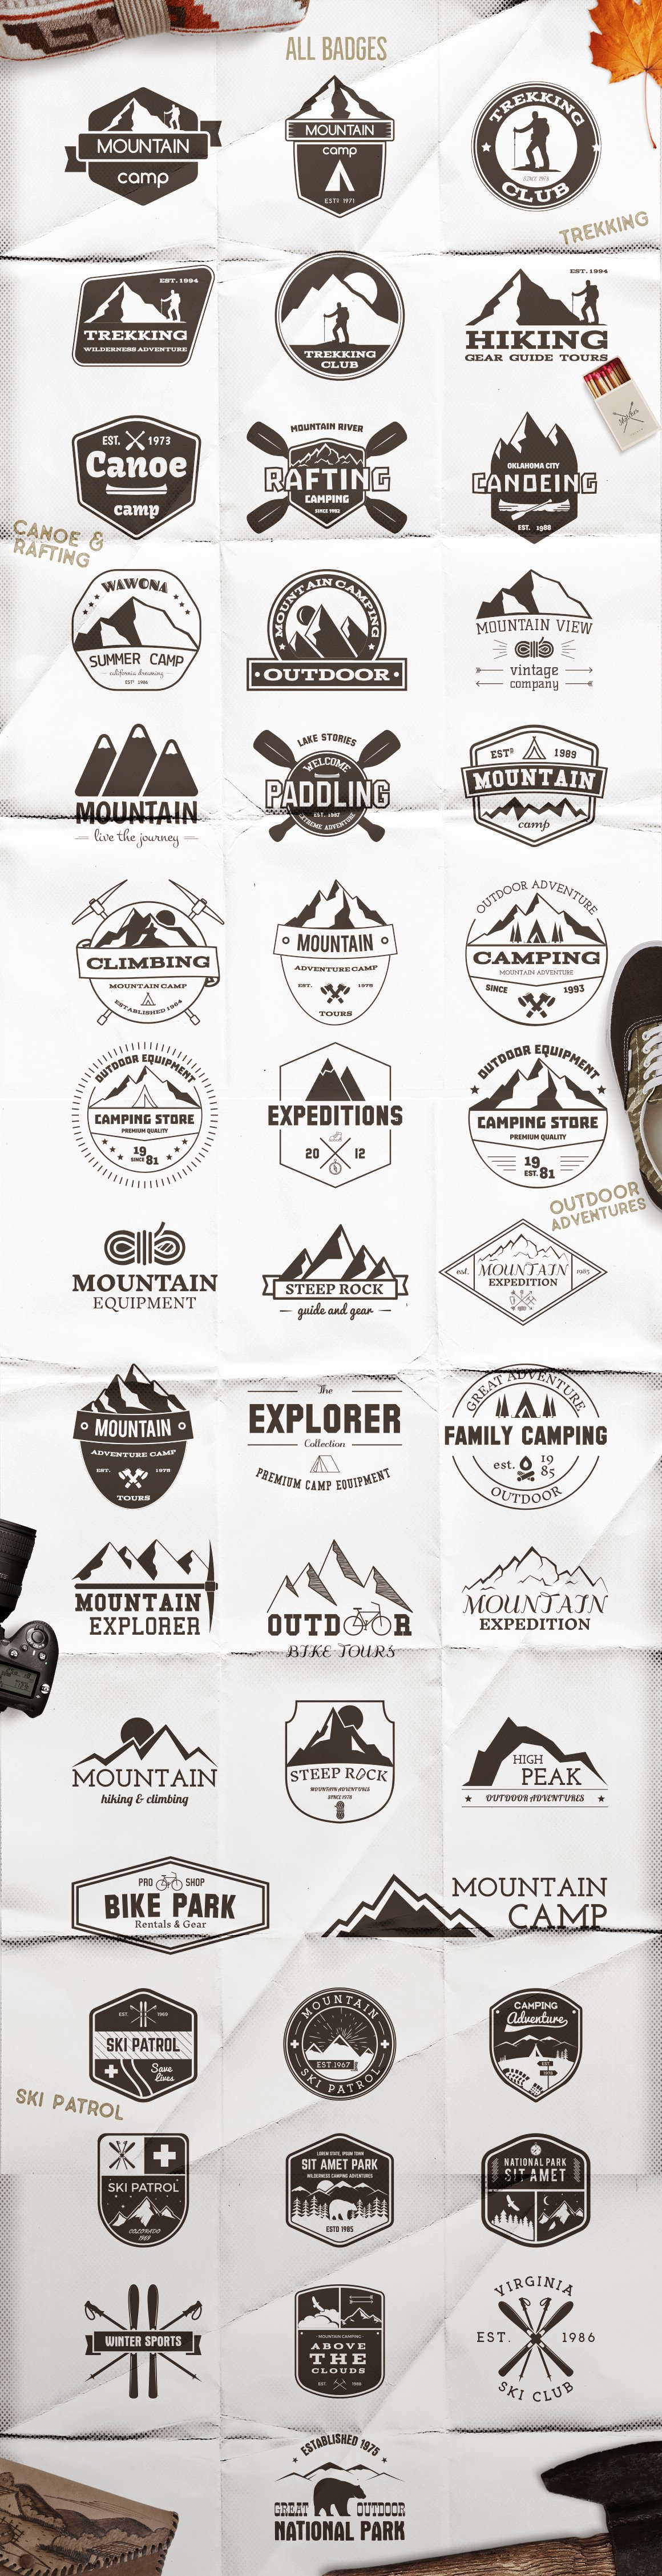 52 Camping Logos + 20 Icons Collection